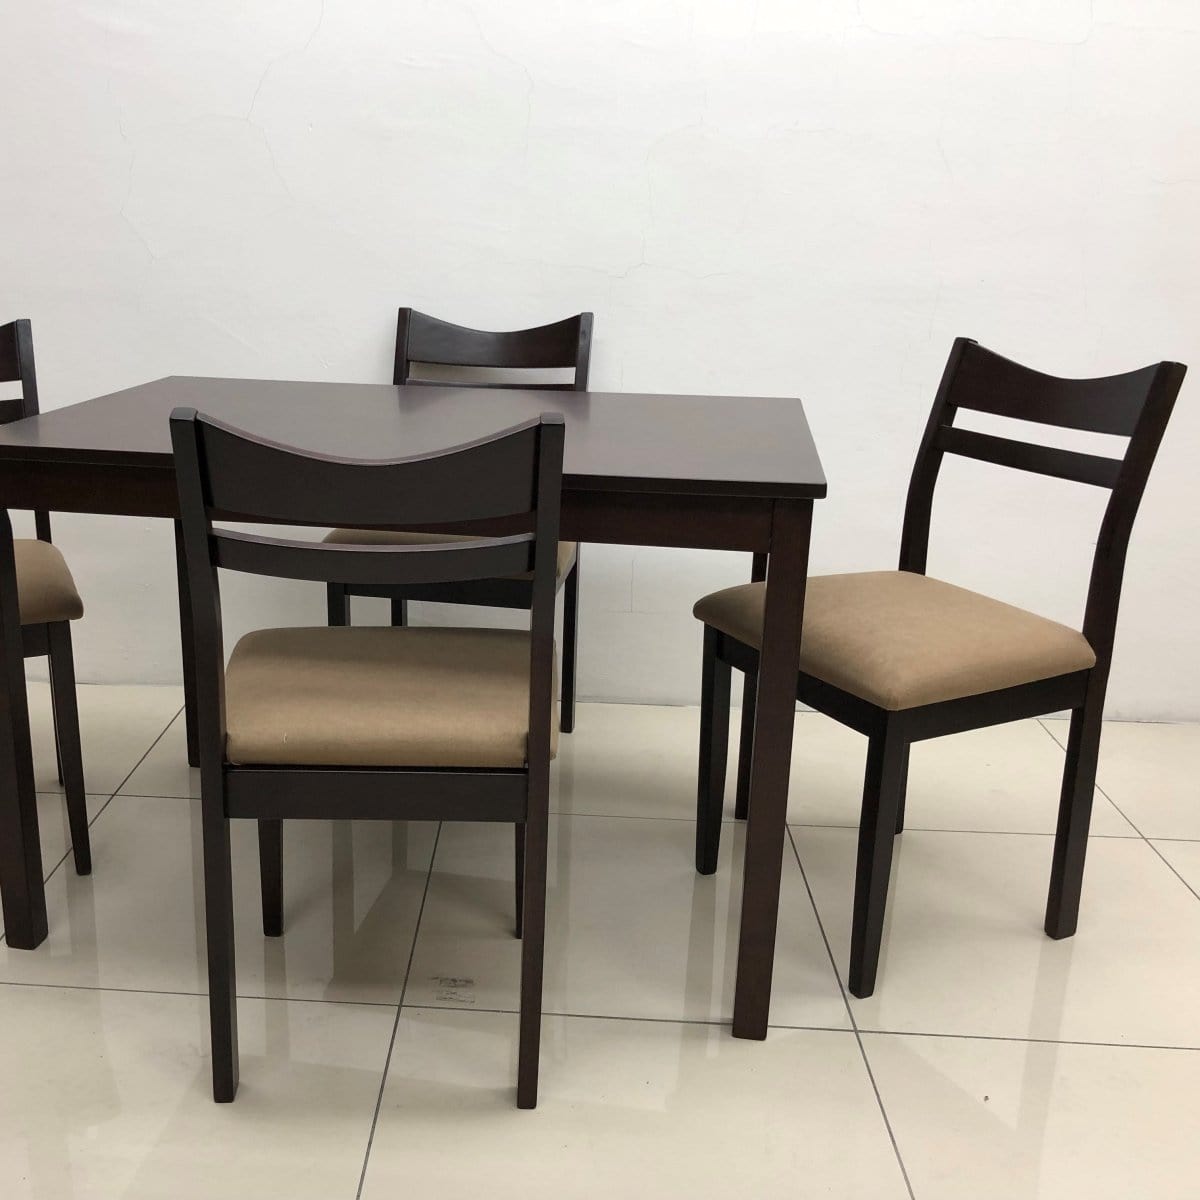 HINO 5pc 1.2m Solid Wood Dining Set (SYF-0149) picket and rail